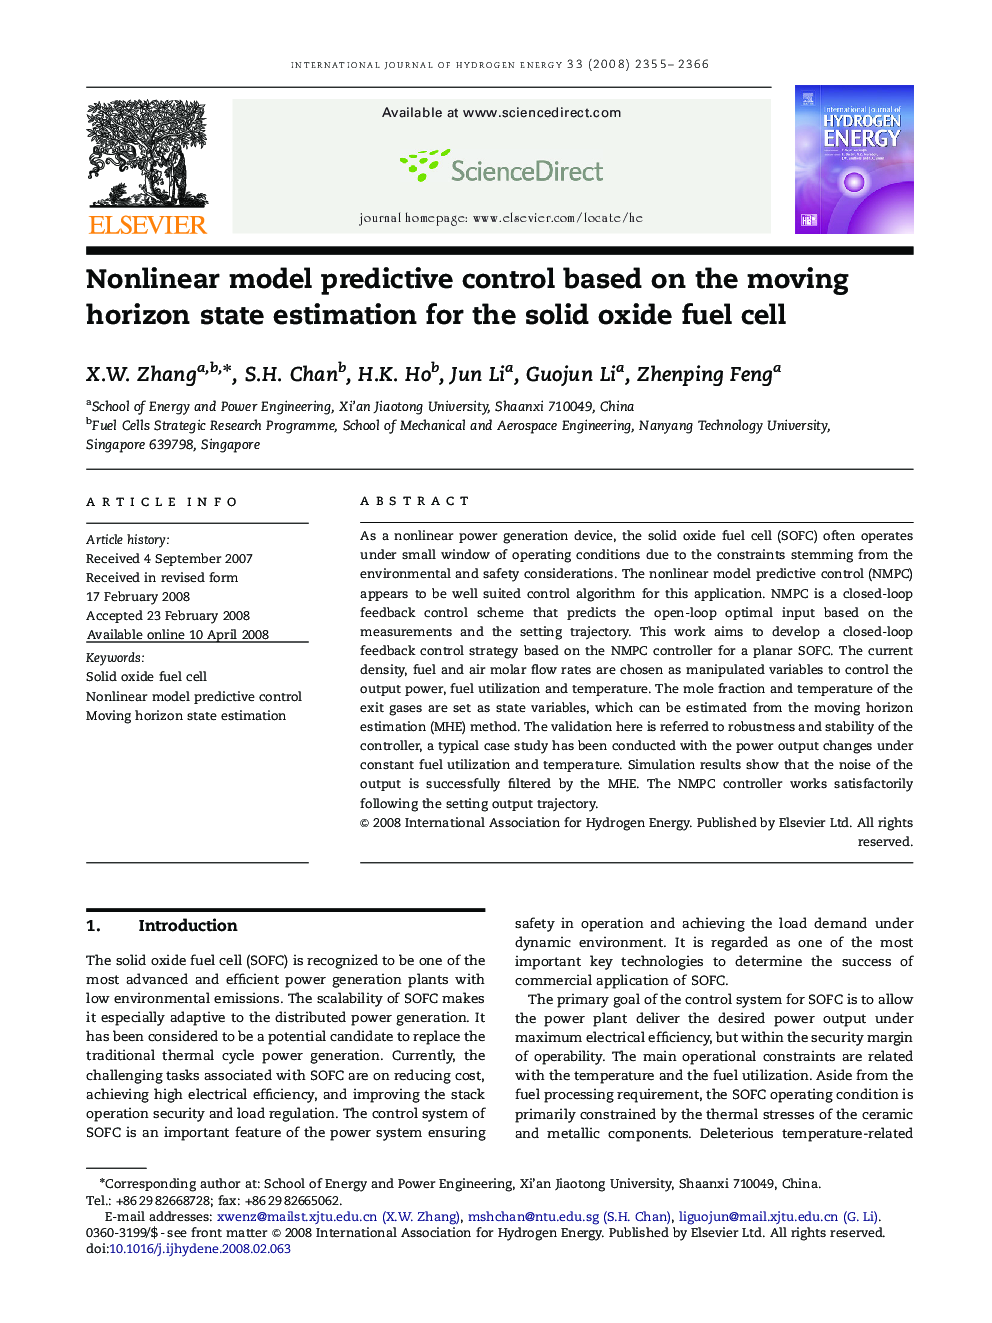 Nonlinear model predictive control based on the moving horizon state estimation for the solid oxide fuel cell